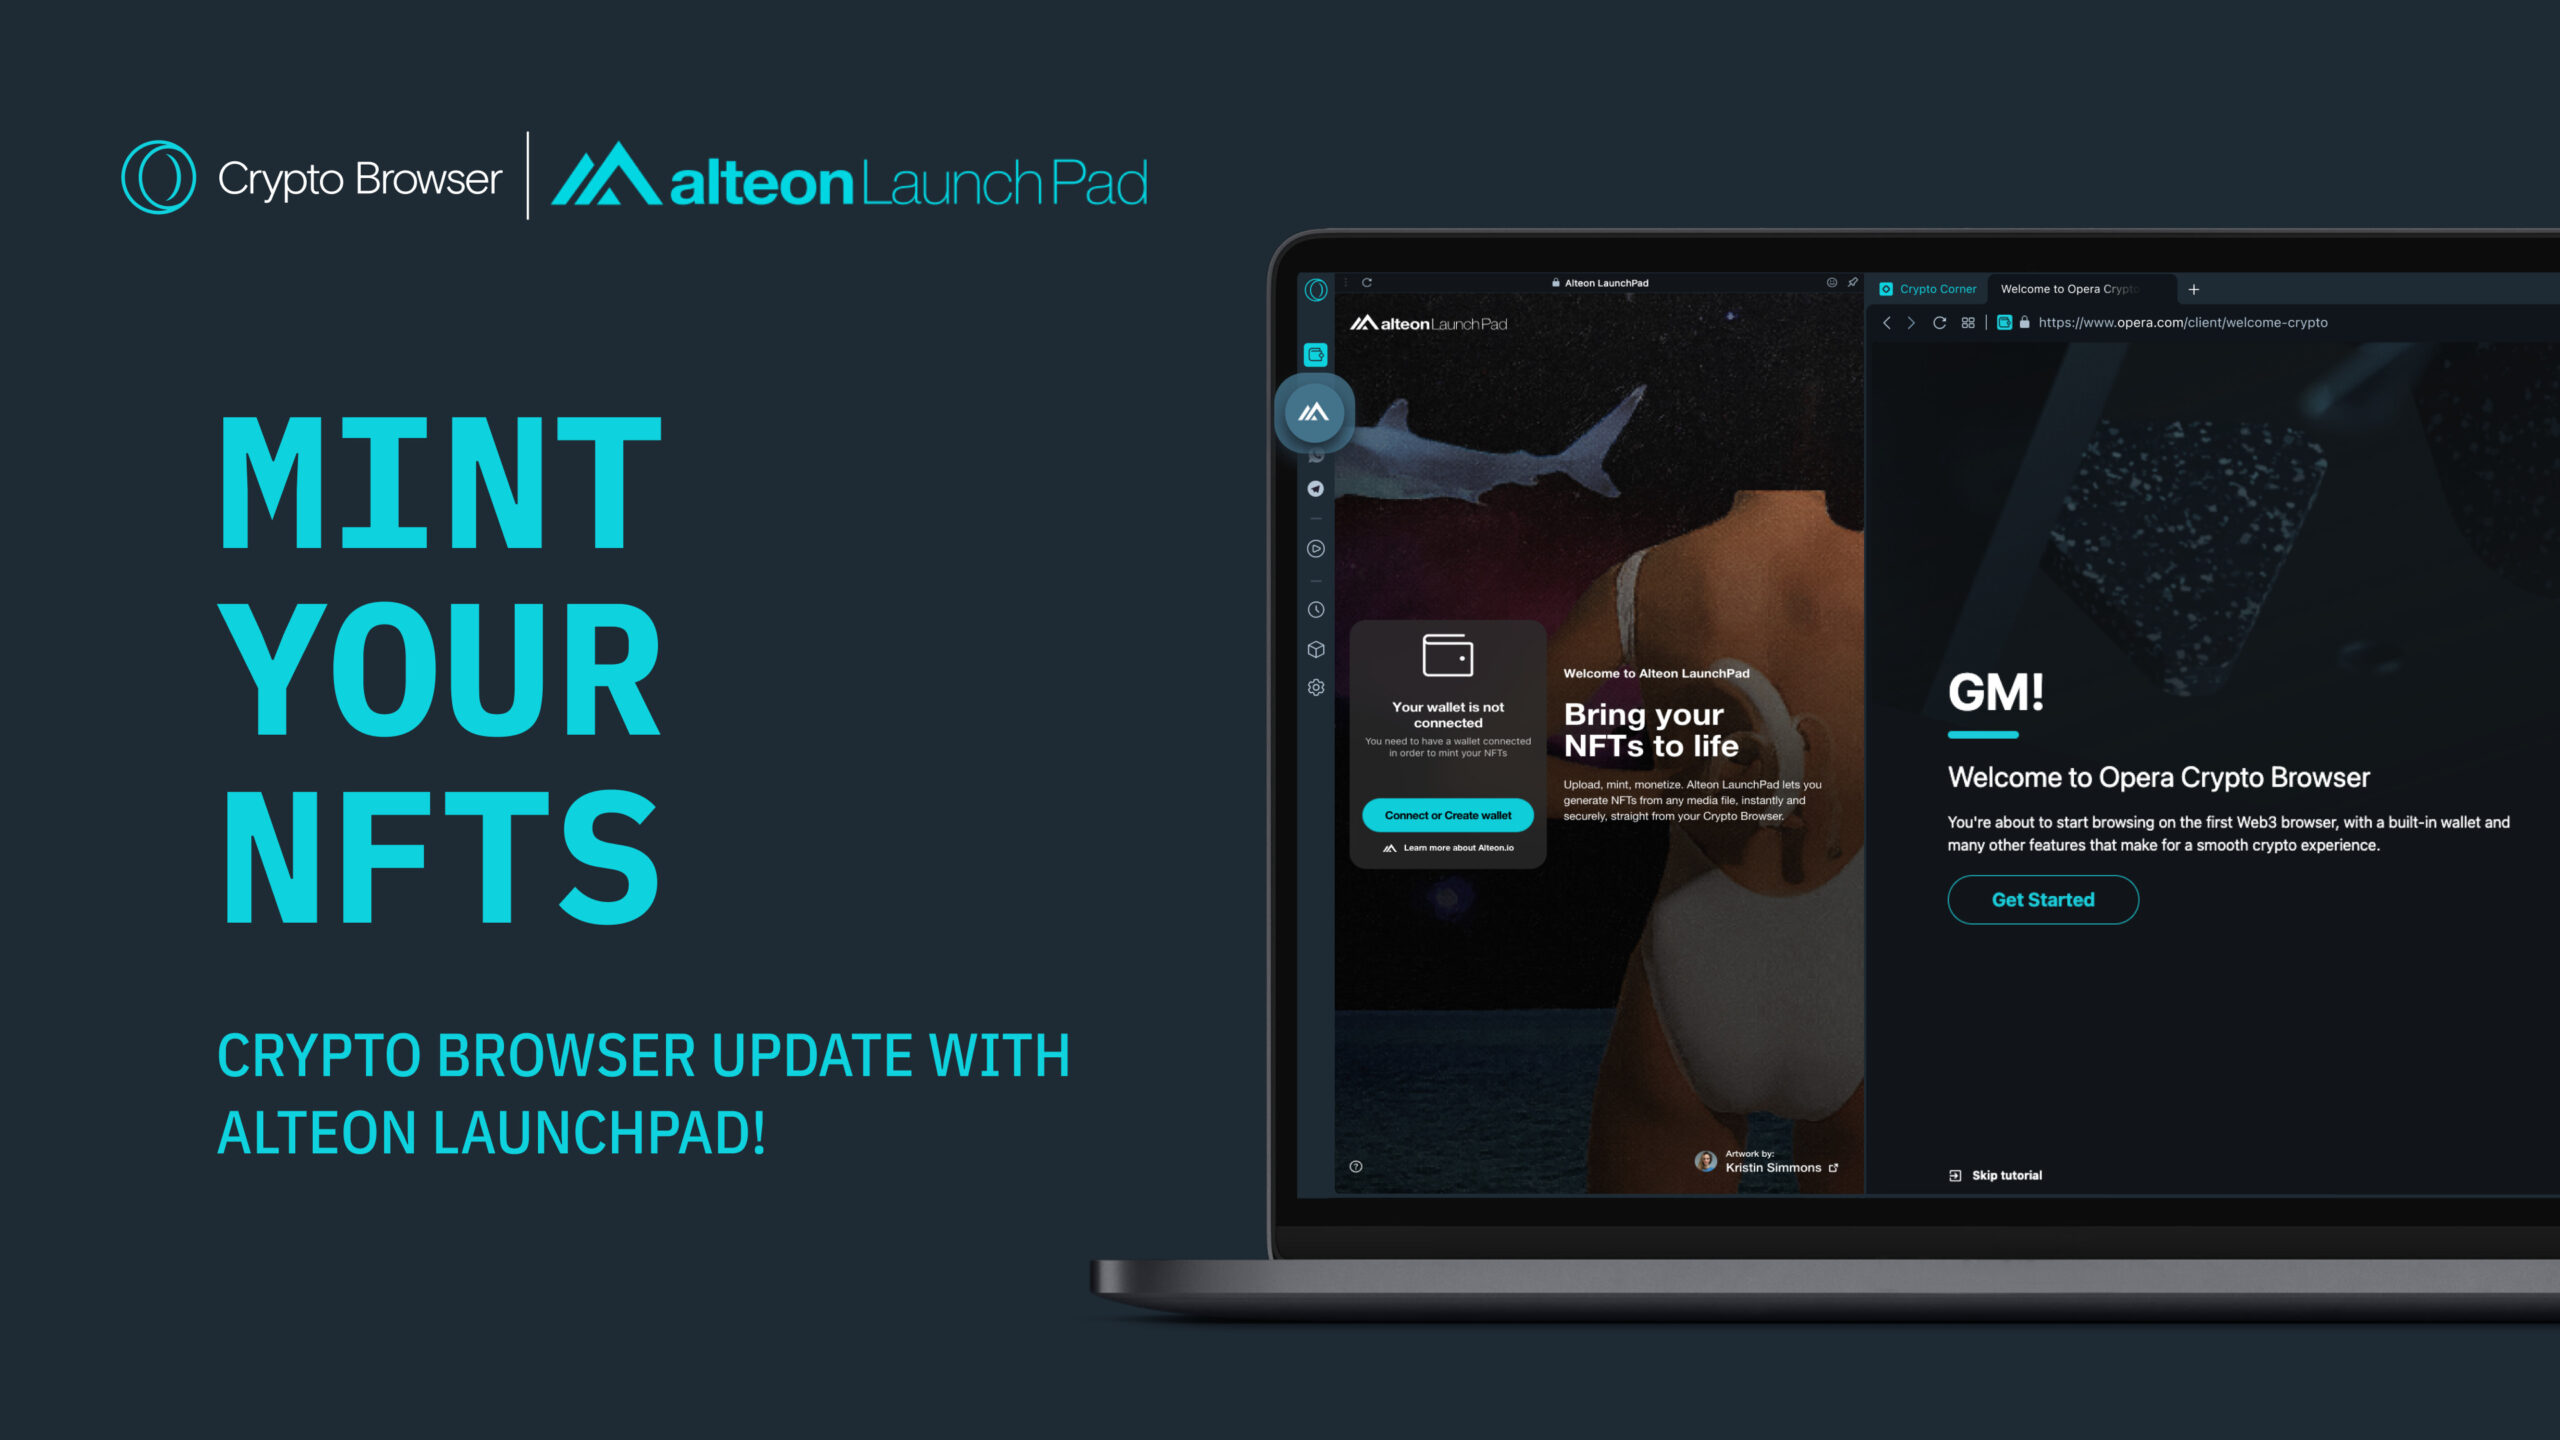 Alteon Launchpad to mint NFTs in Opera Crypto Browser